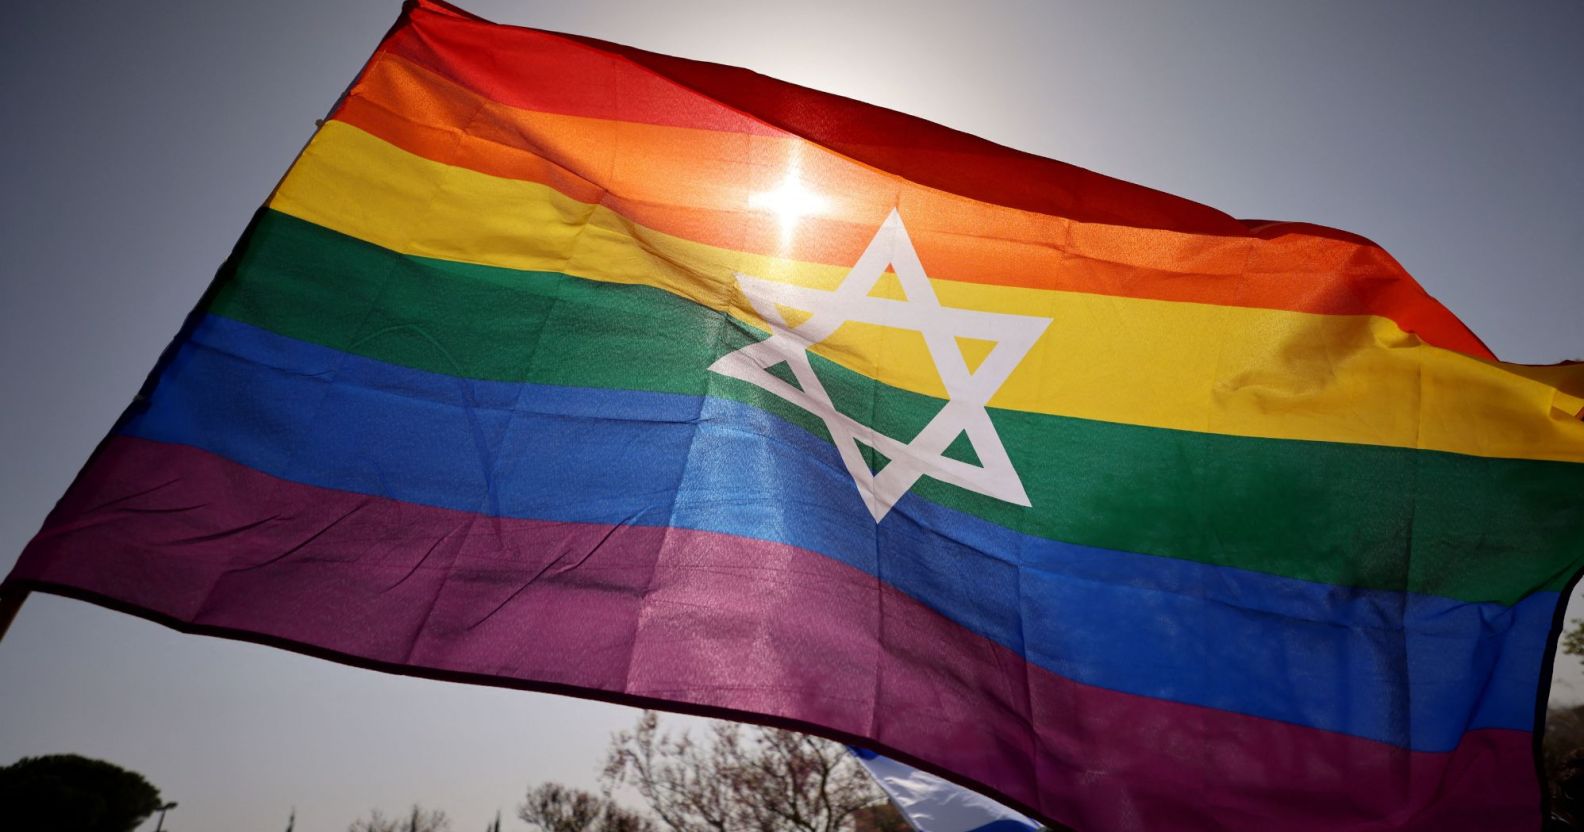 A photo of an Israel flag with the LGBTQ+ stripes during a Pride march.